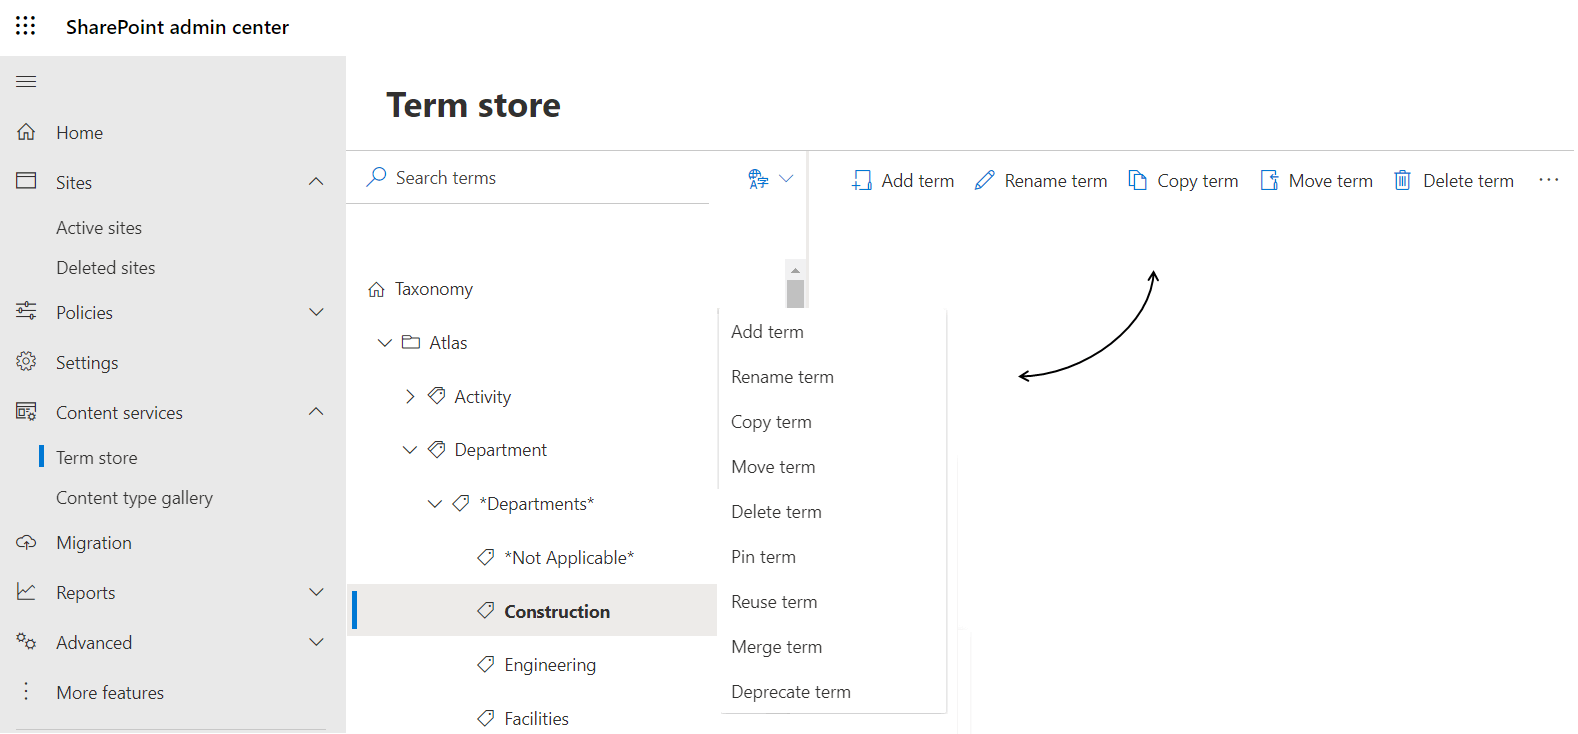 Term Store - term set options for managing terms